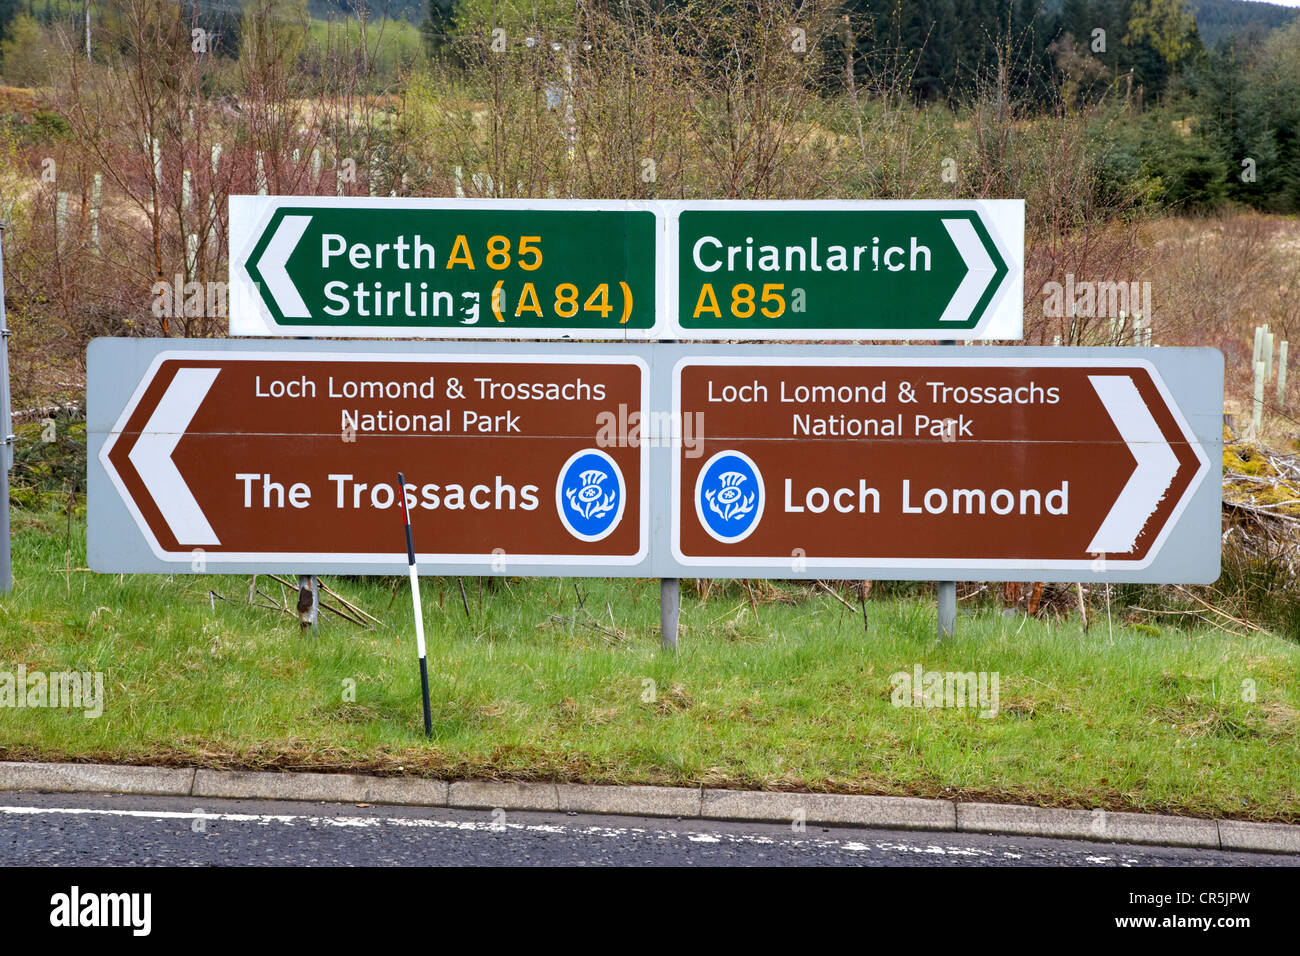 roadsign on the a85 in scotland perth to crianlarich road showing the ...